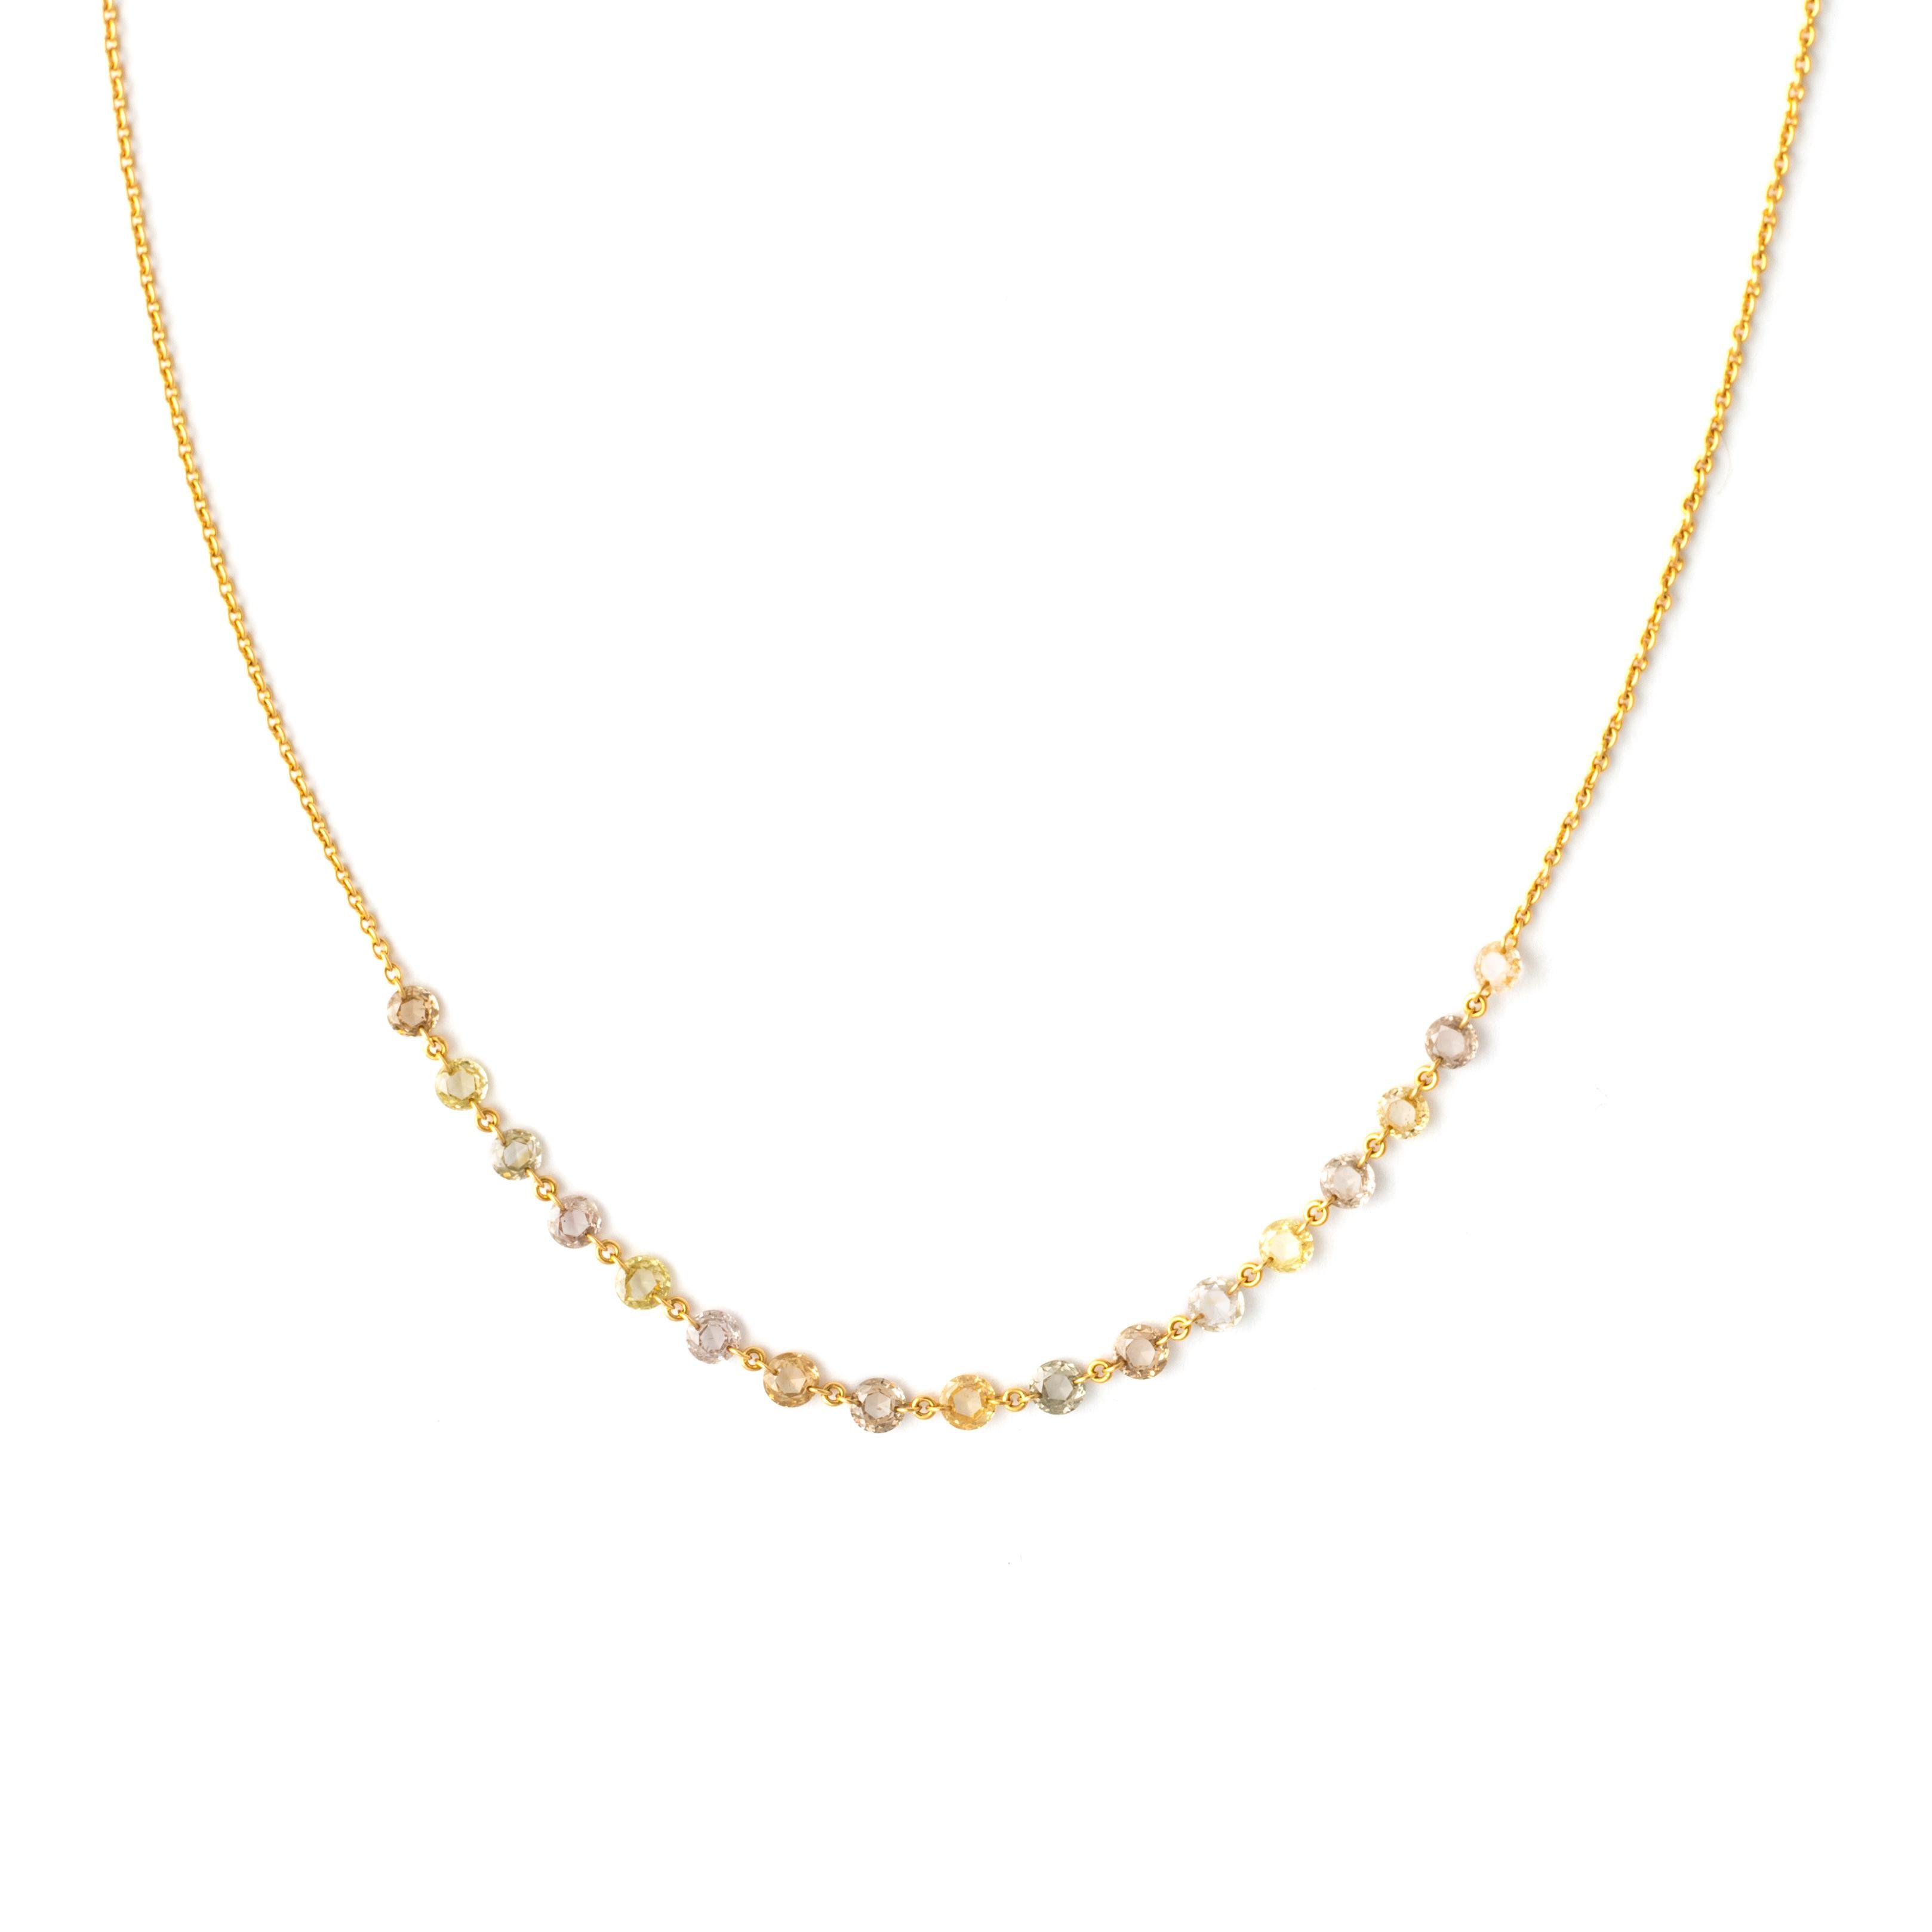 Necklace 18K yellow gold Natural Fancy colors Diamond Rose cut Si1. 
Total 2.00 carat.
Length: Approx. 45 centimeters.

